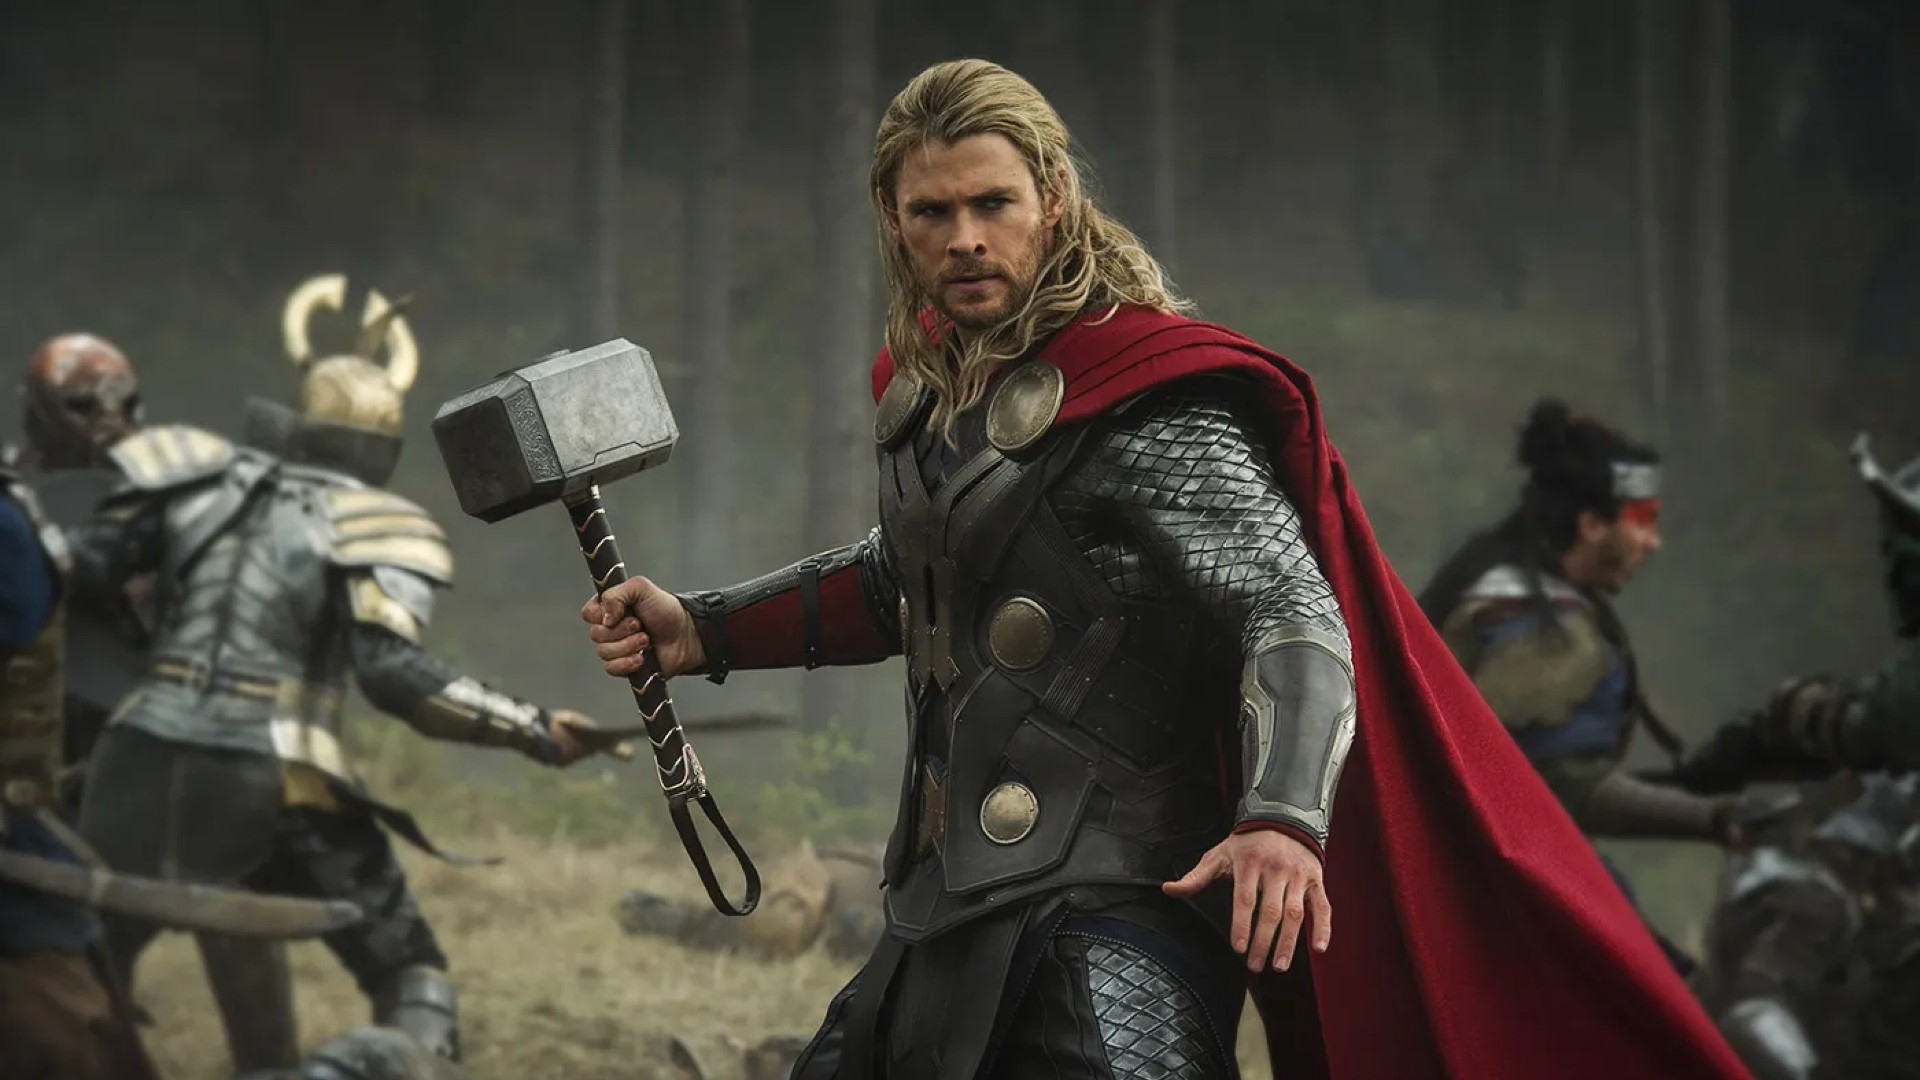 Thor 4' Rotten Tomatoes Score Revealed As First Reviews Roll In